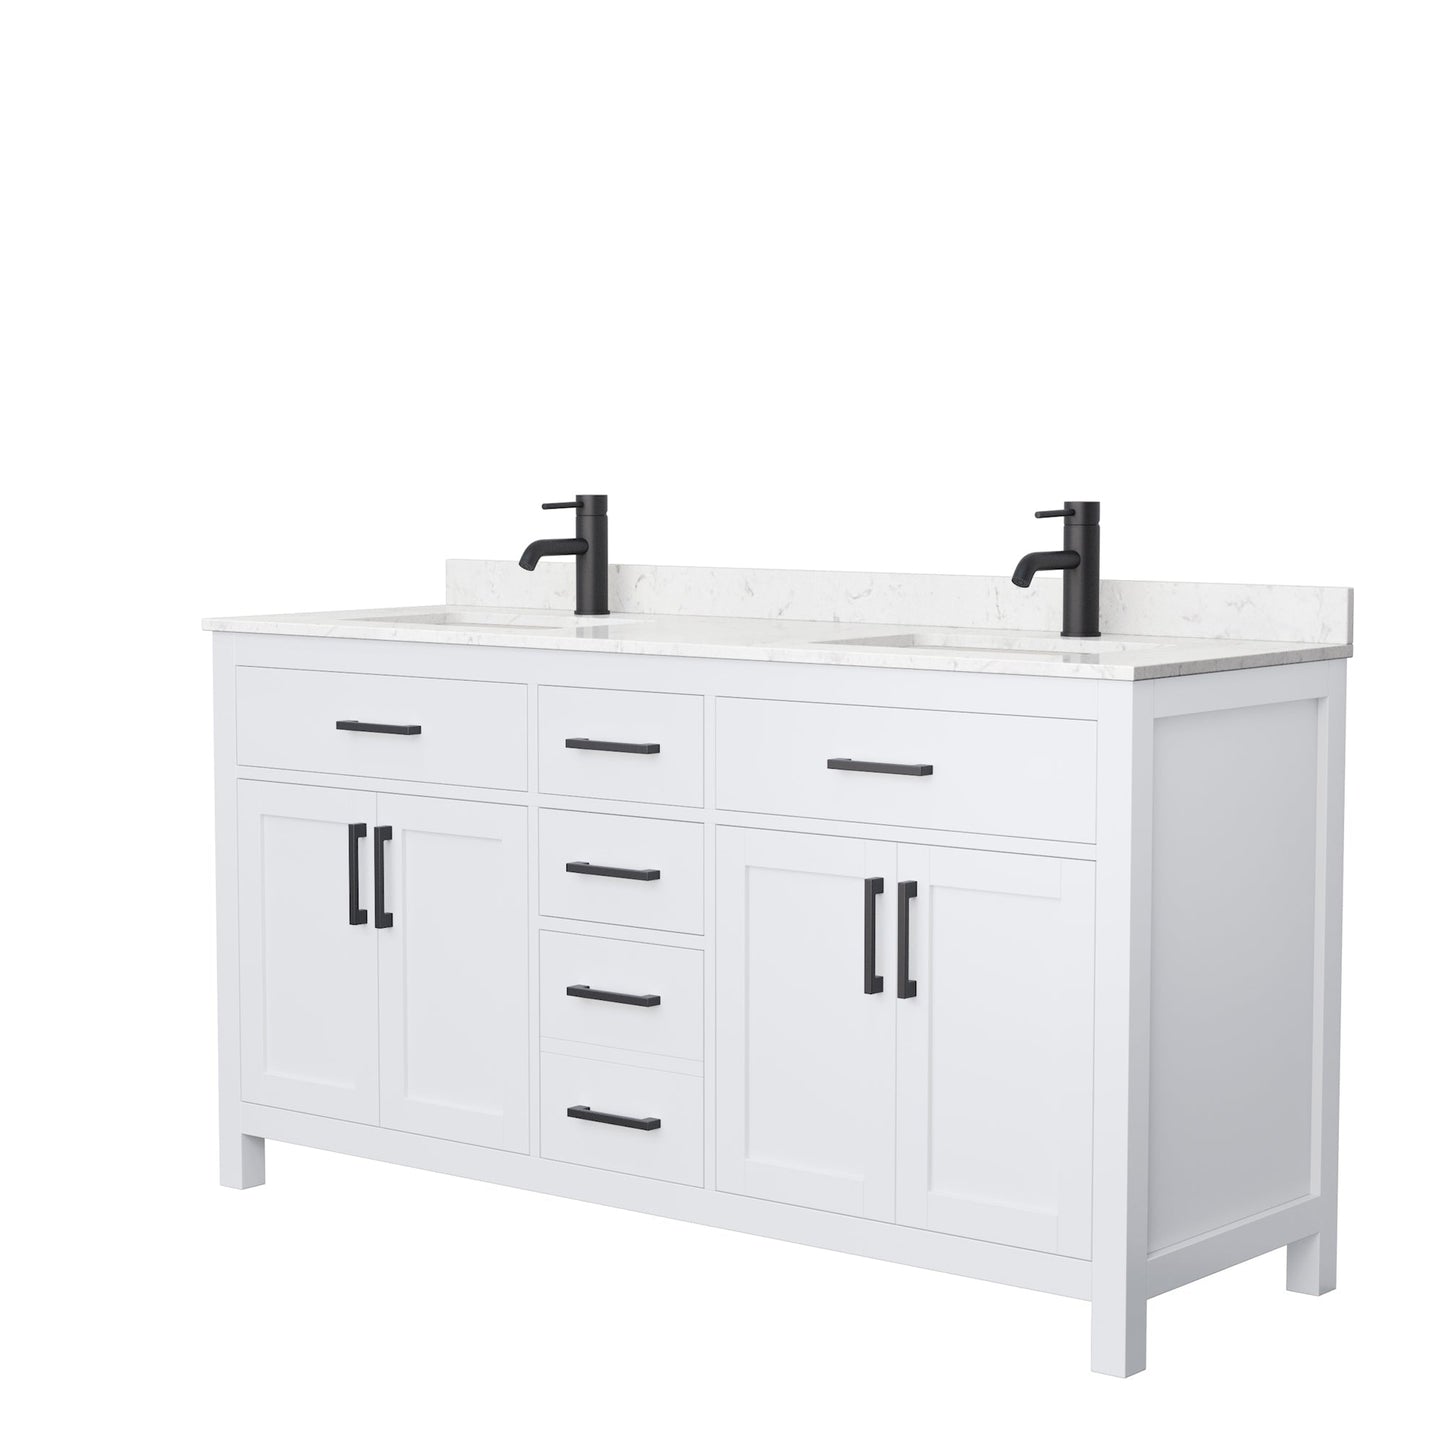 Wyndham Collection Beckett 66" Double Bathroom White Vanity With White Carrara Cultured Marble Countertop, Undermount Square Sink And Matte Black Trim